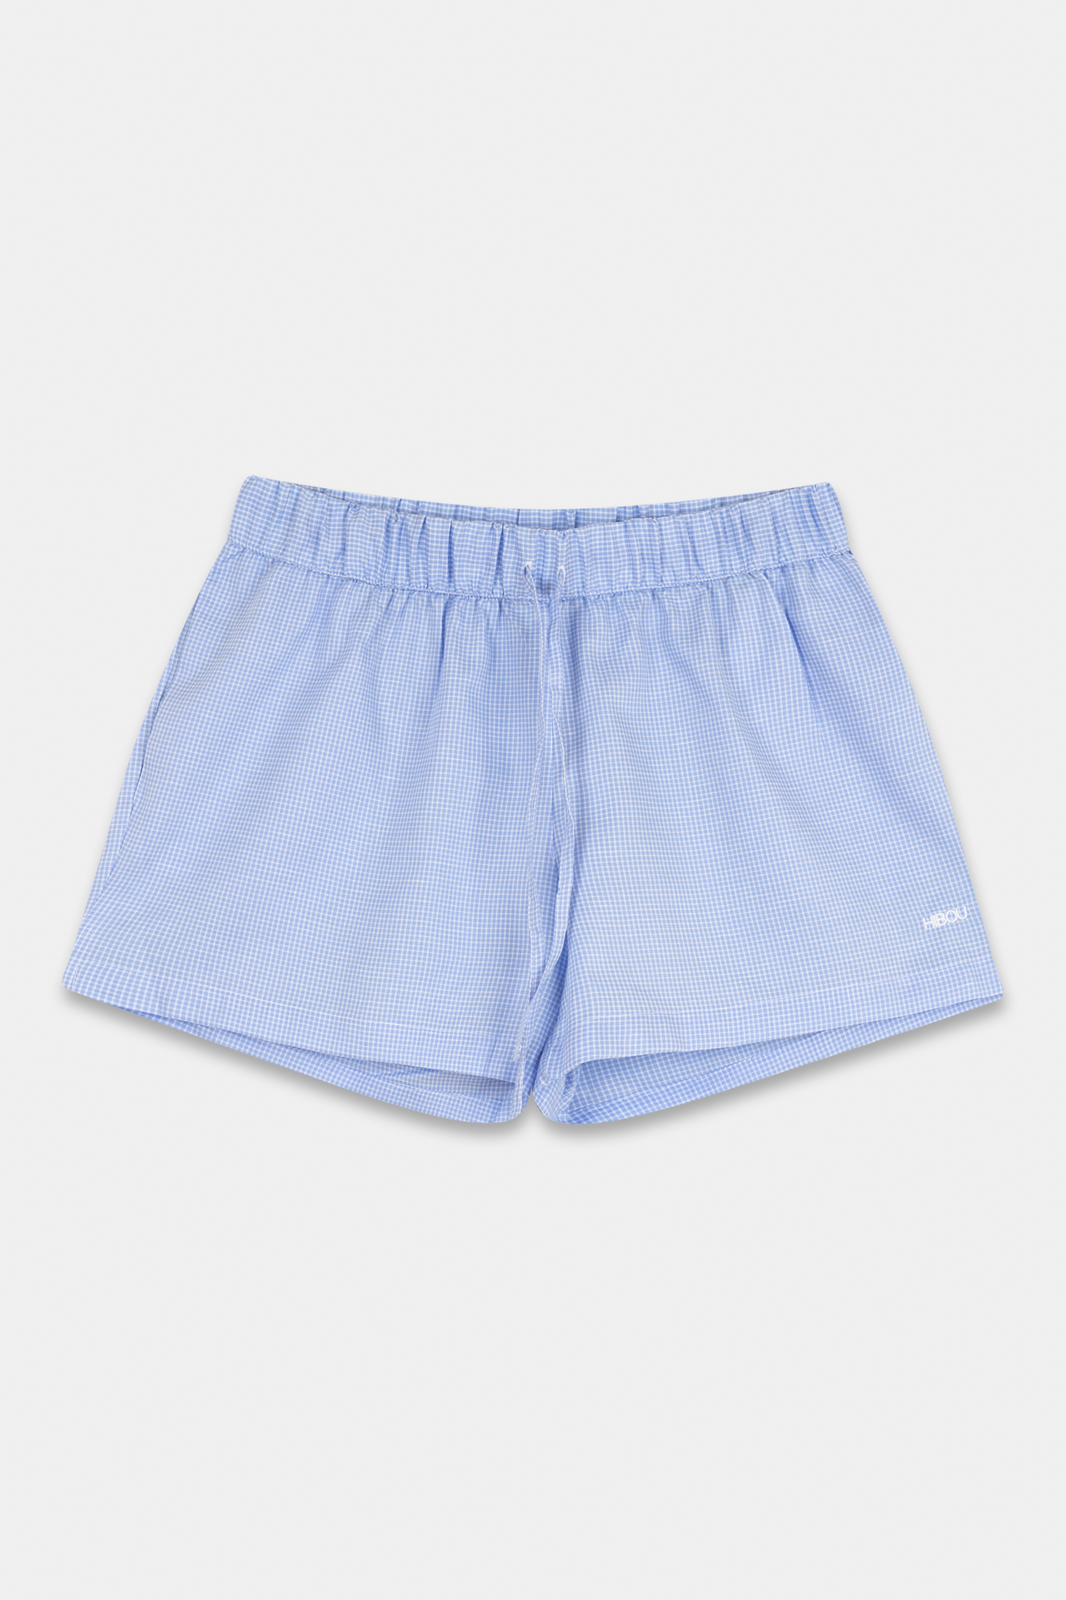 Blue Checkered Shorts with Pockets